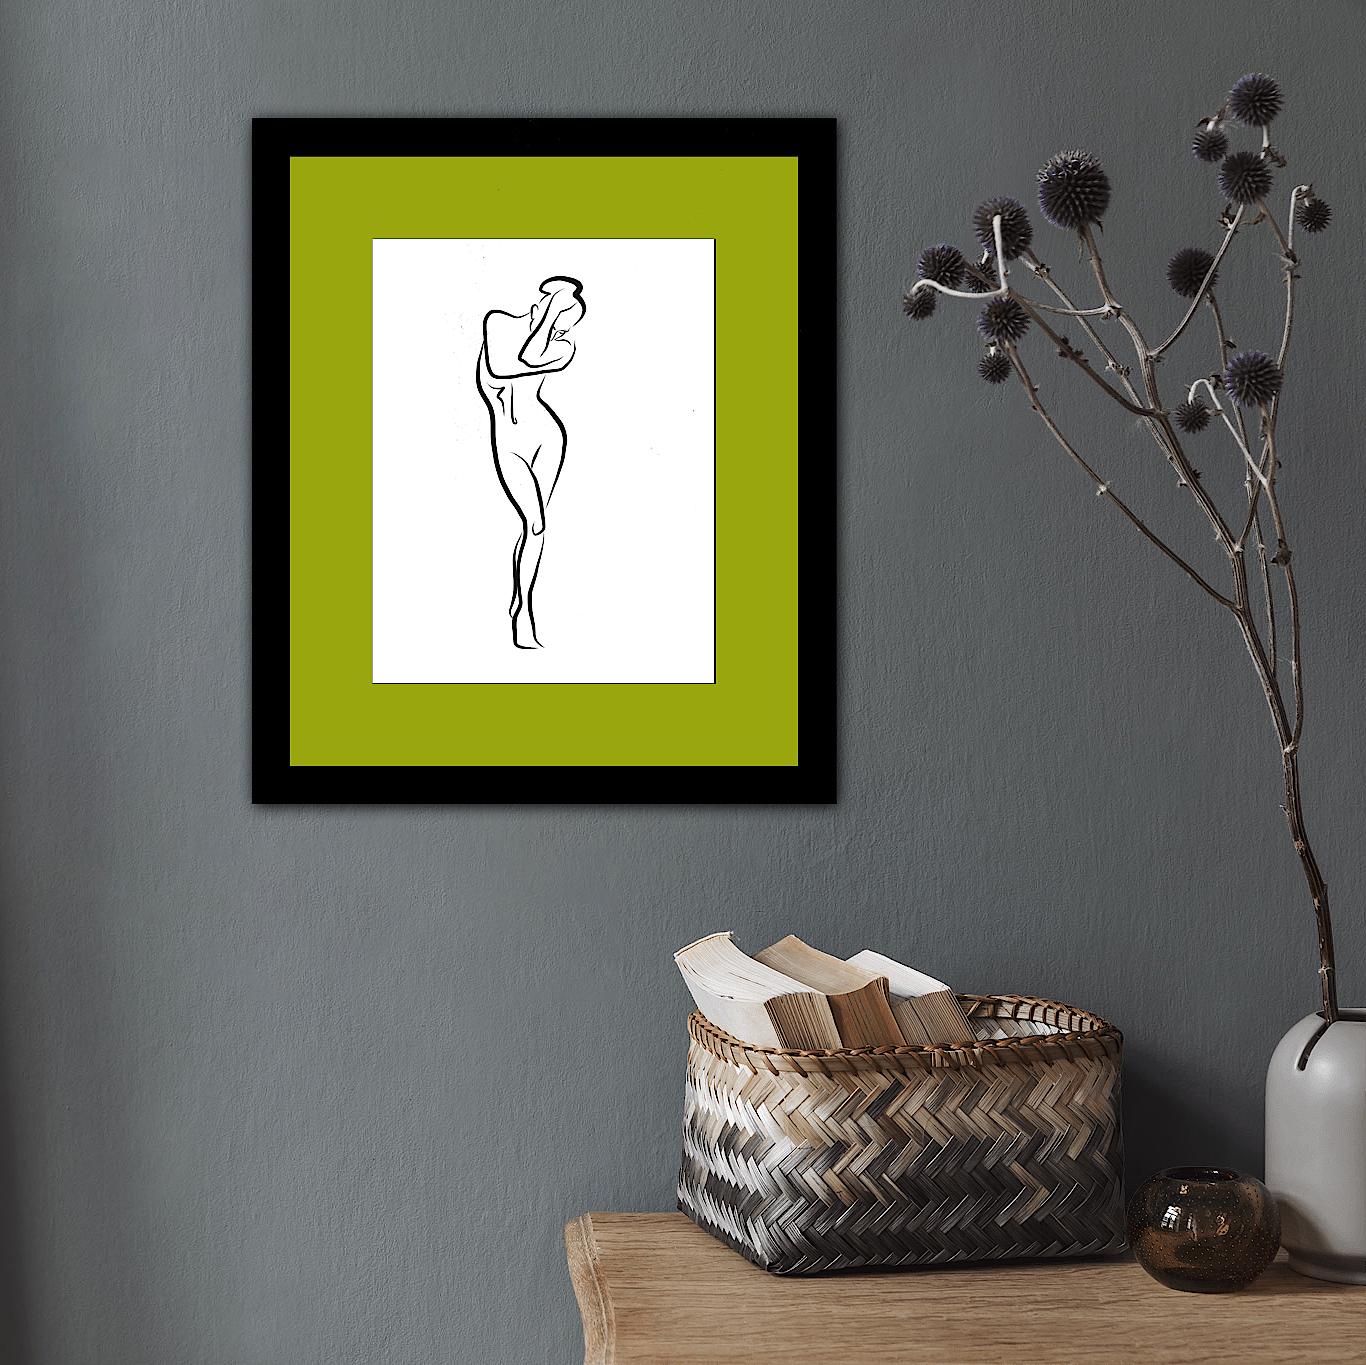 Haiku #26, 1/50 - Digital Vector Drawing Shy Standing Female Nude Woman Figure

This is a limited edition (50) digital black & white print of a standing female nude, executed in 17 vector lines. It is part of a series called Haiku, after the style